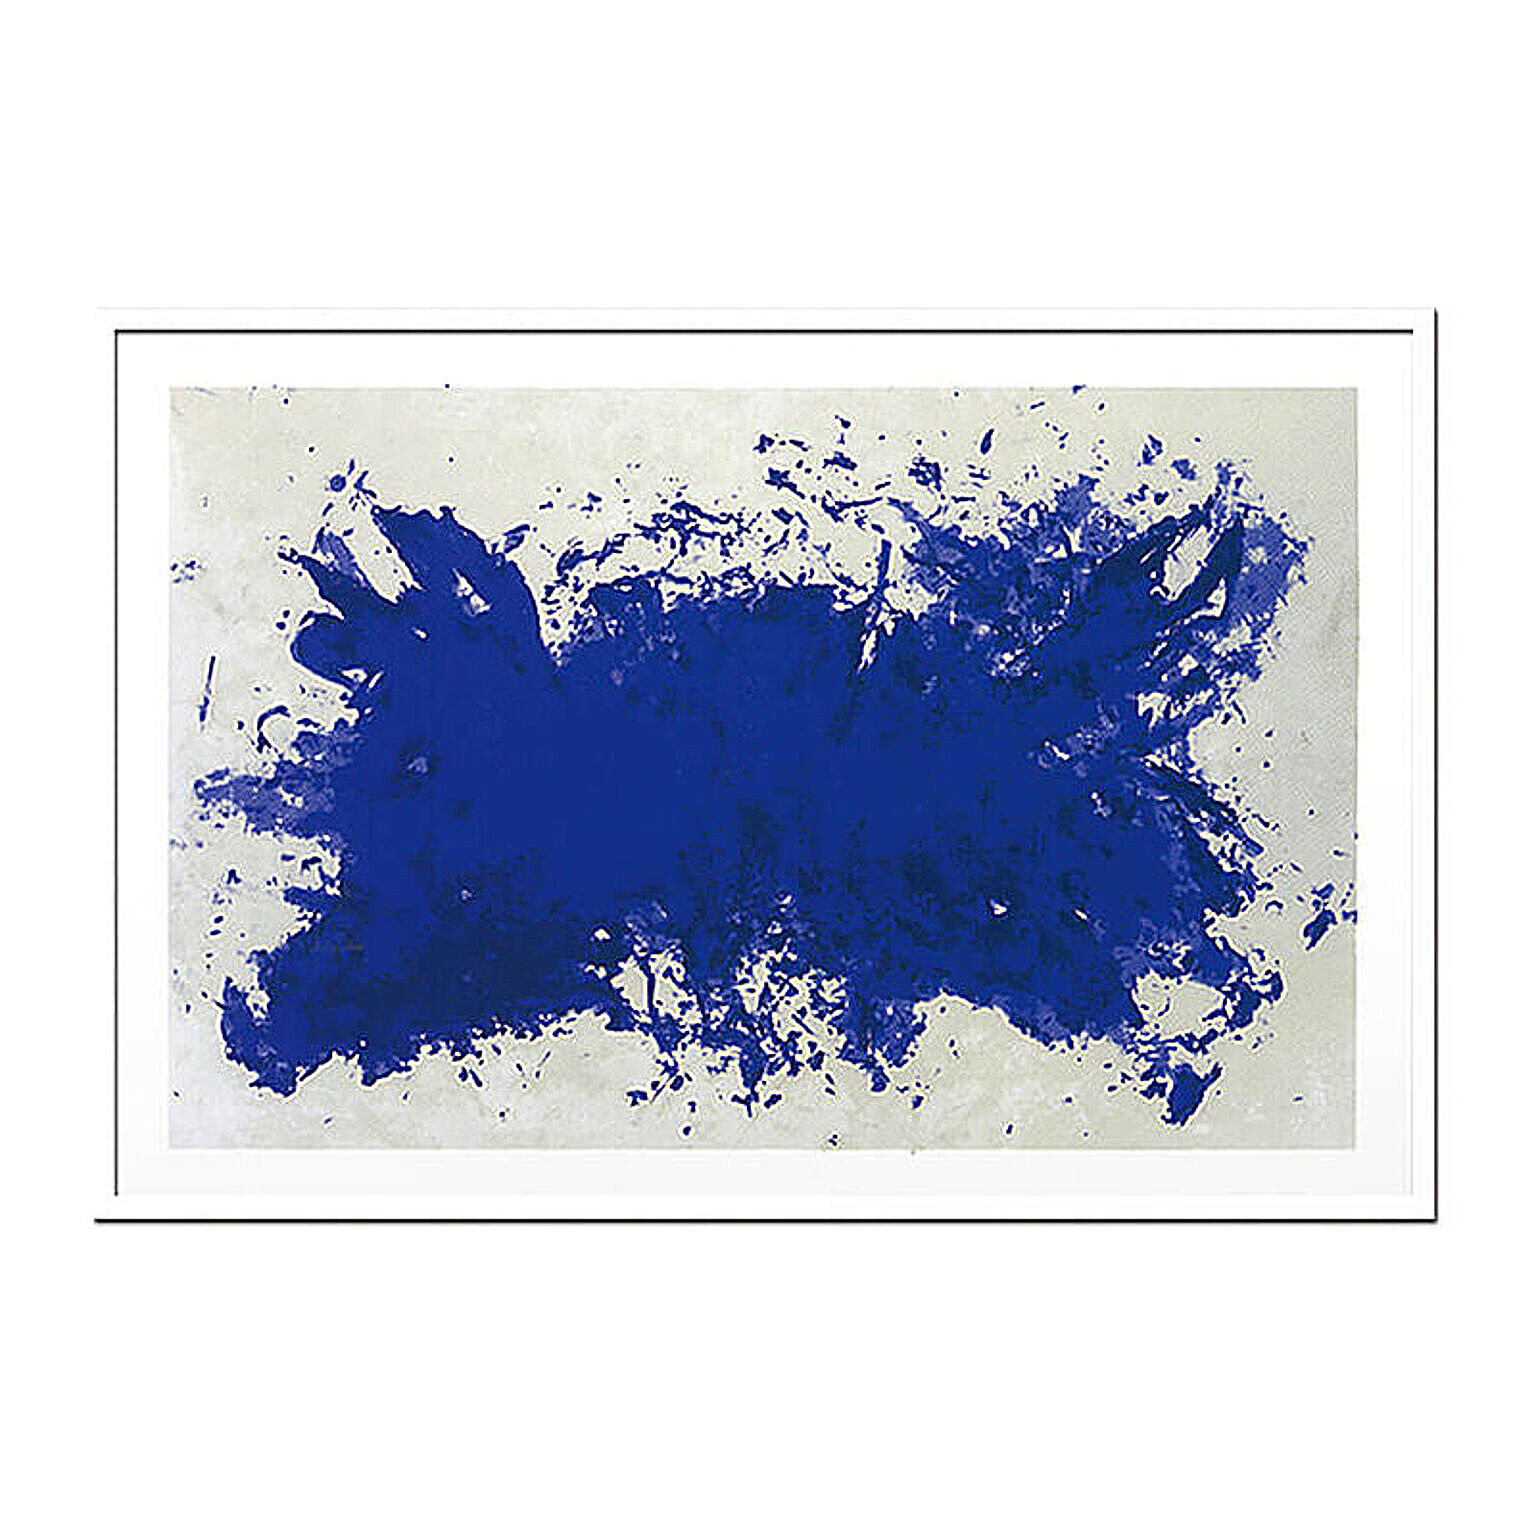 Yves Klein（イヴ クライン） Hommage a Tennessee Williams 1960 アートポスター（フレーム付き） m11962